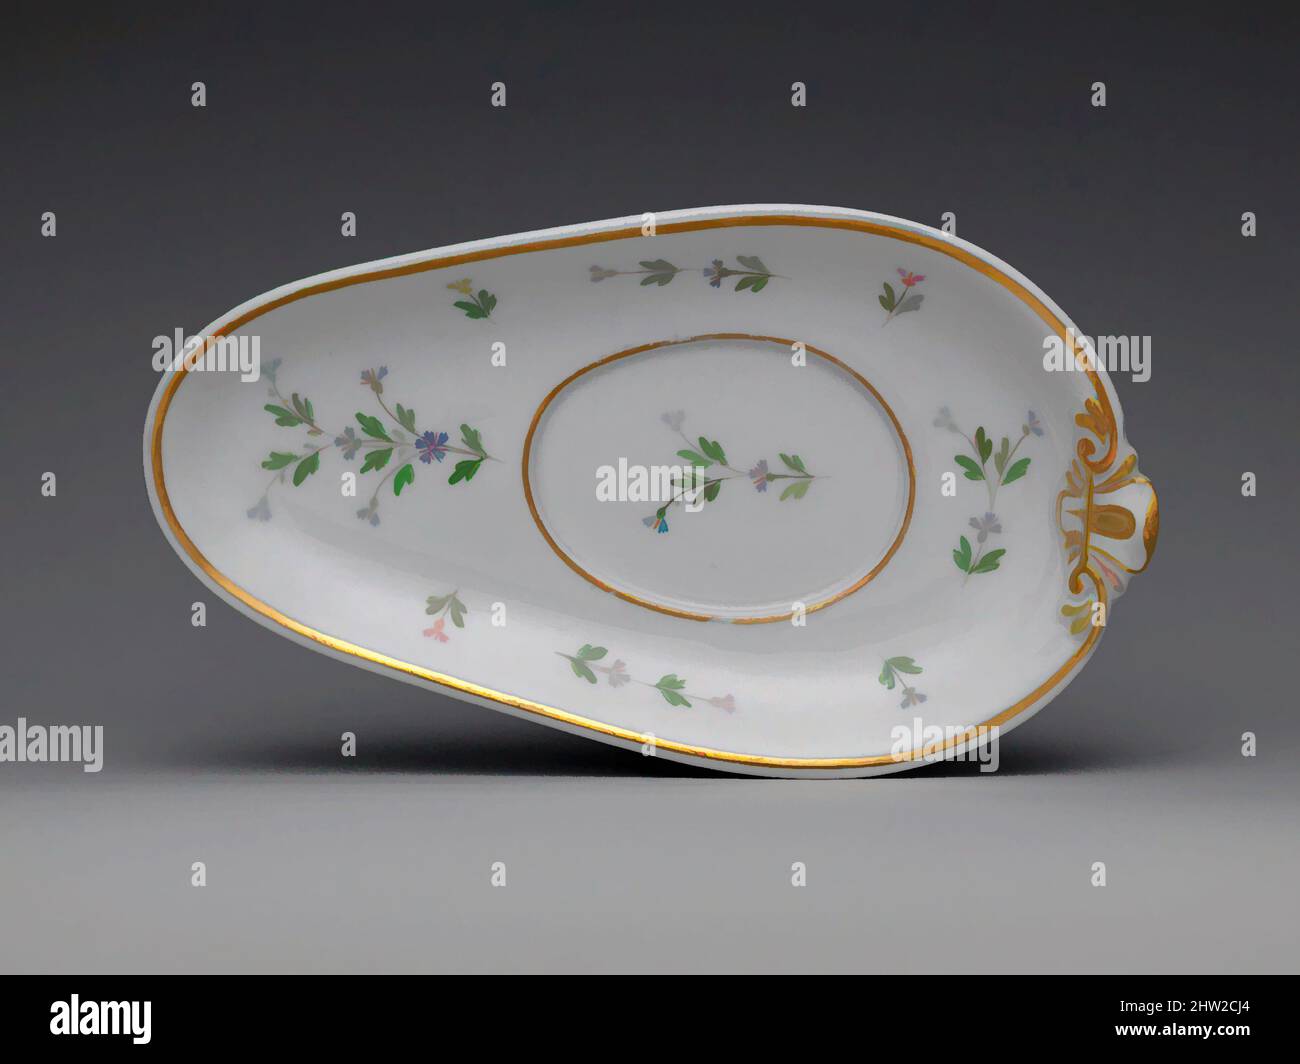 Art inspired by Sauceboat Plate, 1815–30, Made in Paris, France, French, Porcelain, 1 3/4 x 9 15/16 x 5 5/8 in. (4.4 x 25.2 x 14.3 cm), Ceramics, Classic works modernized by Artotop with a splash of modernity. Shapes, color and value, eye-catching visual impact on art. Emotions through freedom of artworks in a contemporary way. A timeless message pursuing a wildly creative new direction. Artists turning to the digital medium and creating the Artotop NFT Stock Photo